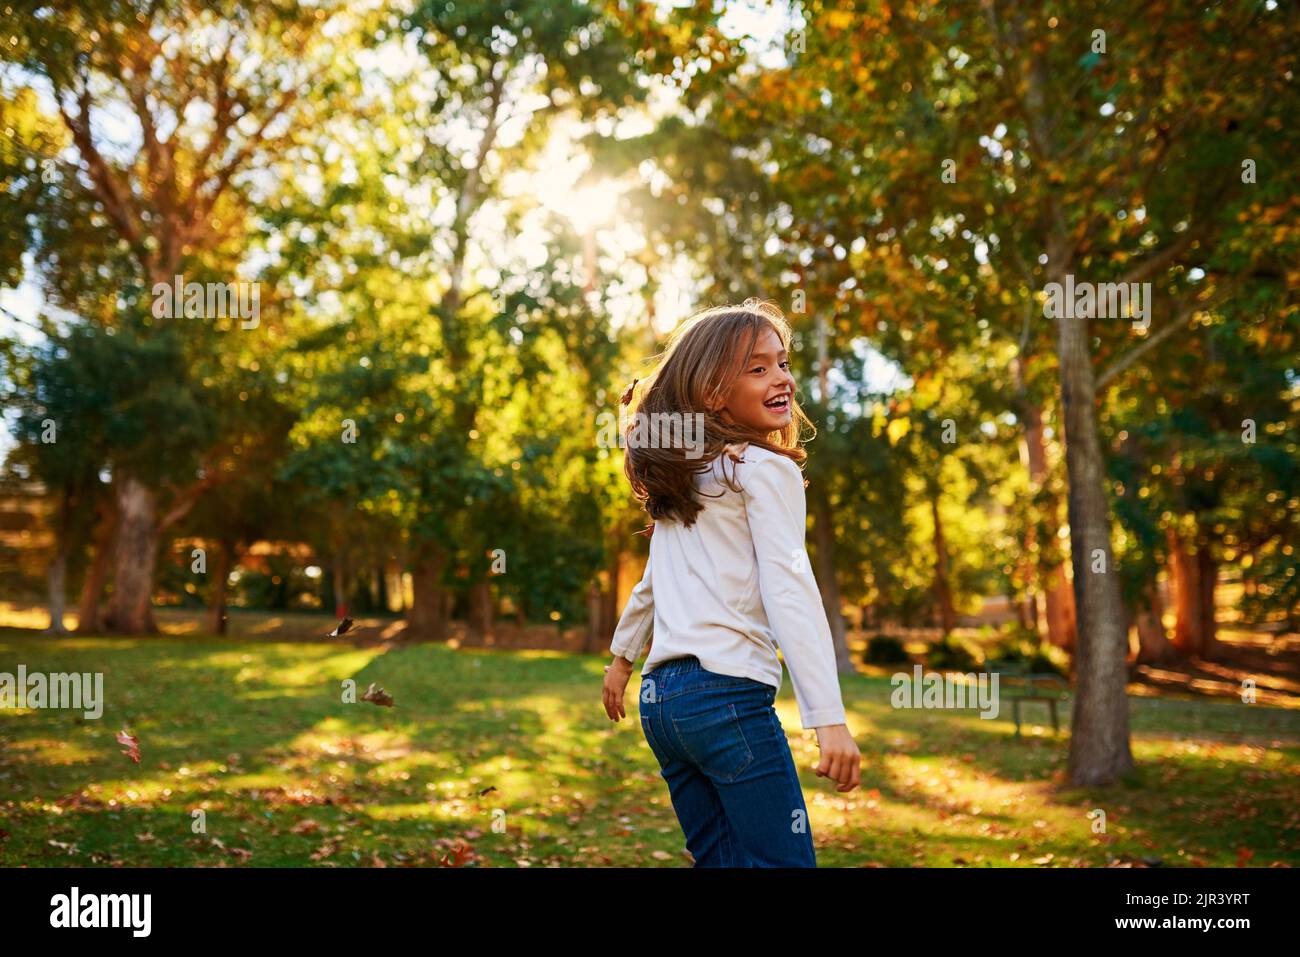 Kids make every moment spectacular. a happy little girl playing in the autumn leaves outdoors. Stock Photo